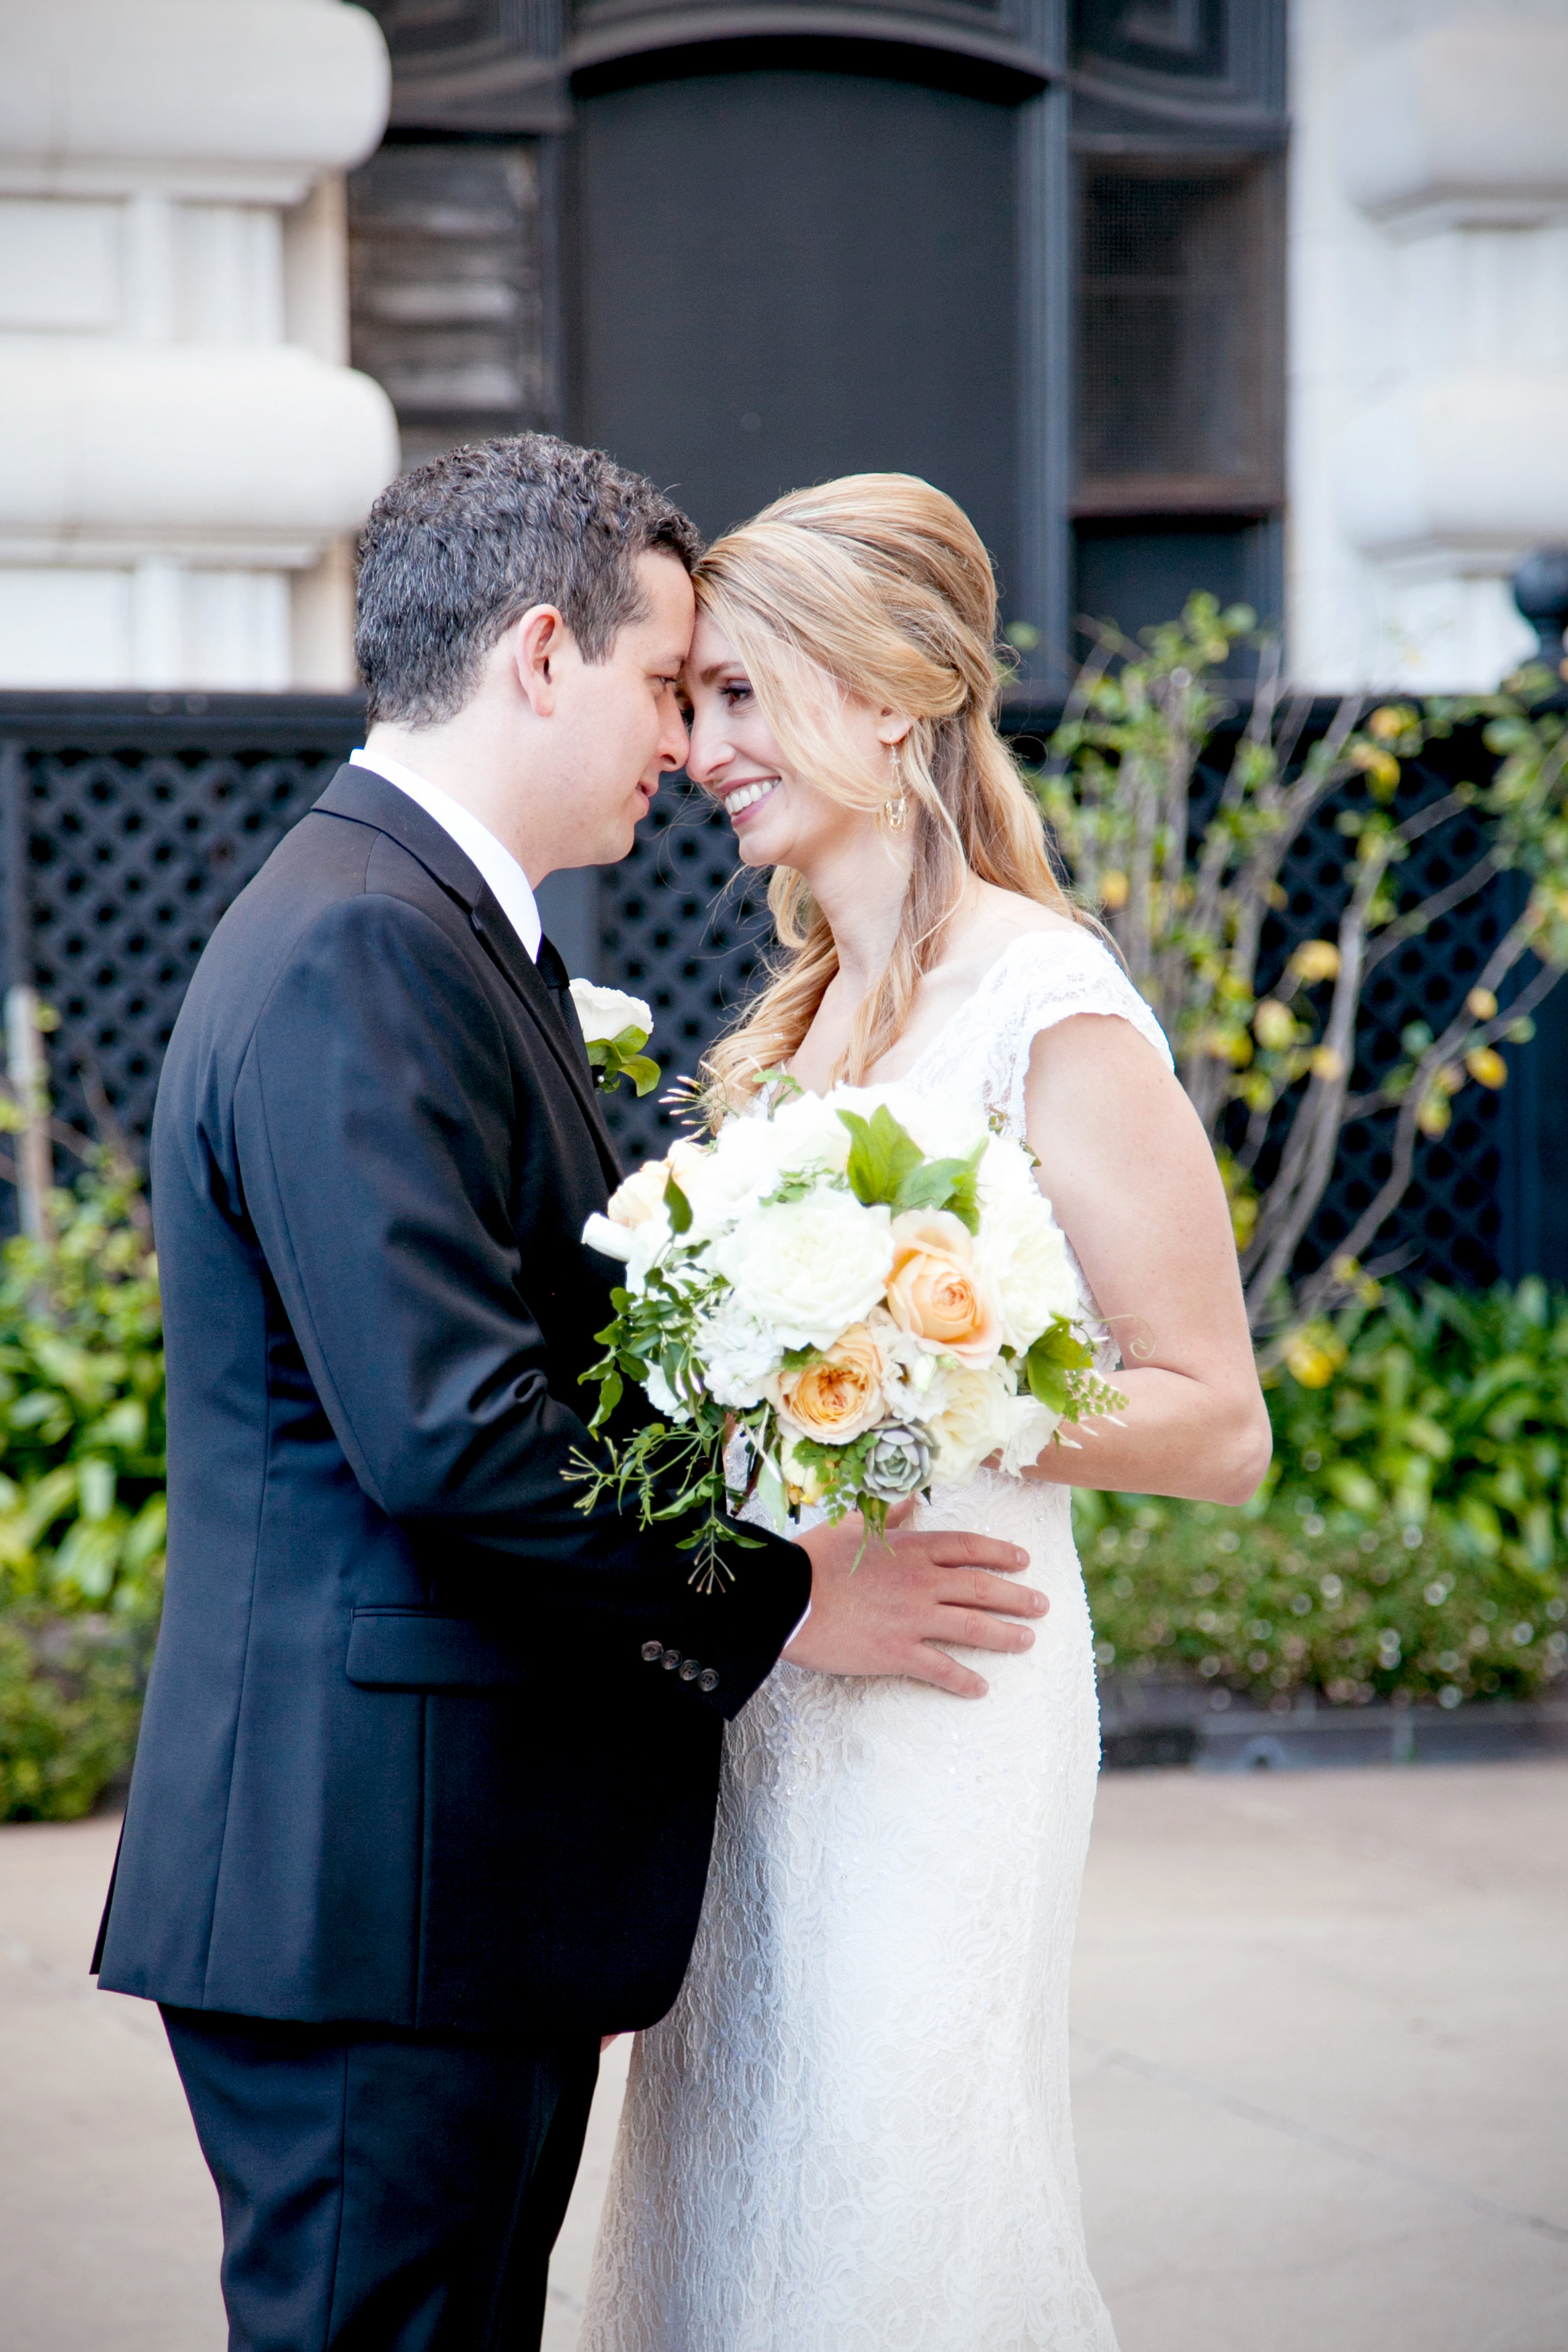 Classic Black and White Bride and Groom//Fairmont Hotel Wedding Bride and Groom San Francisco Meo Baaklini